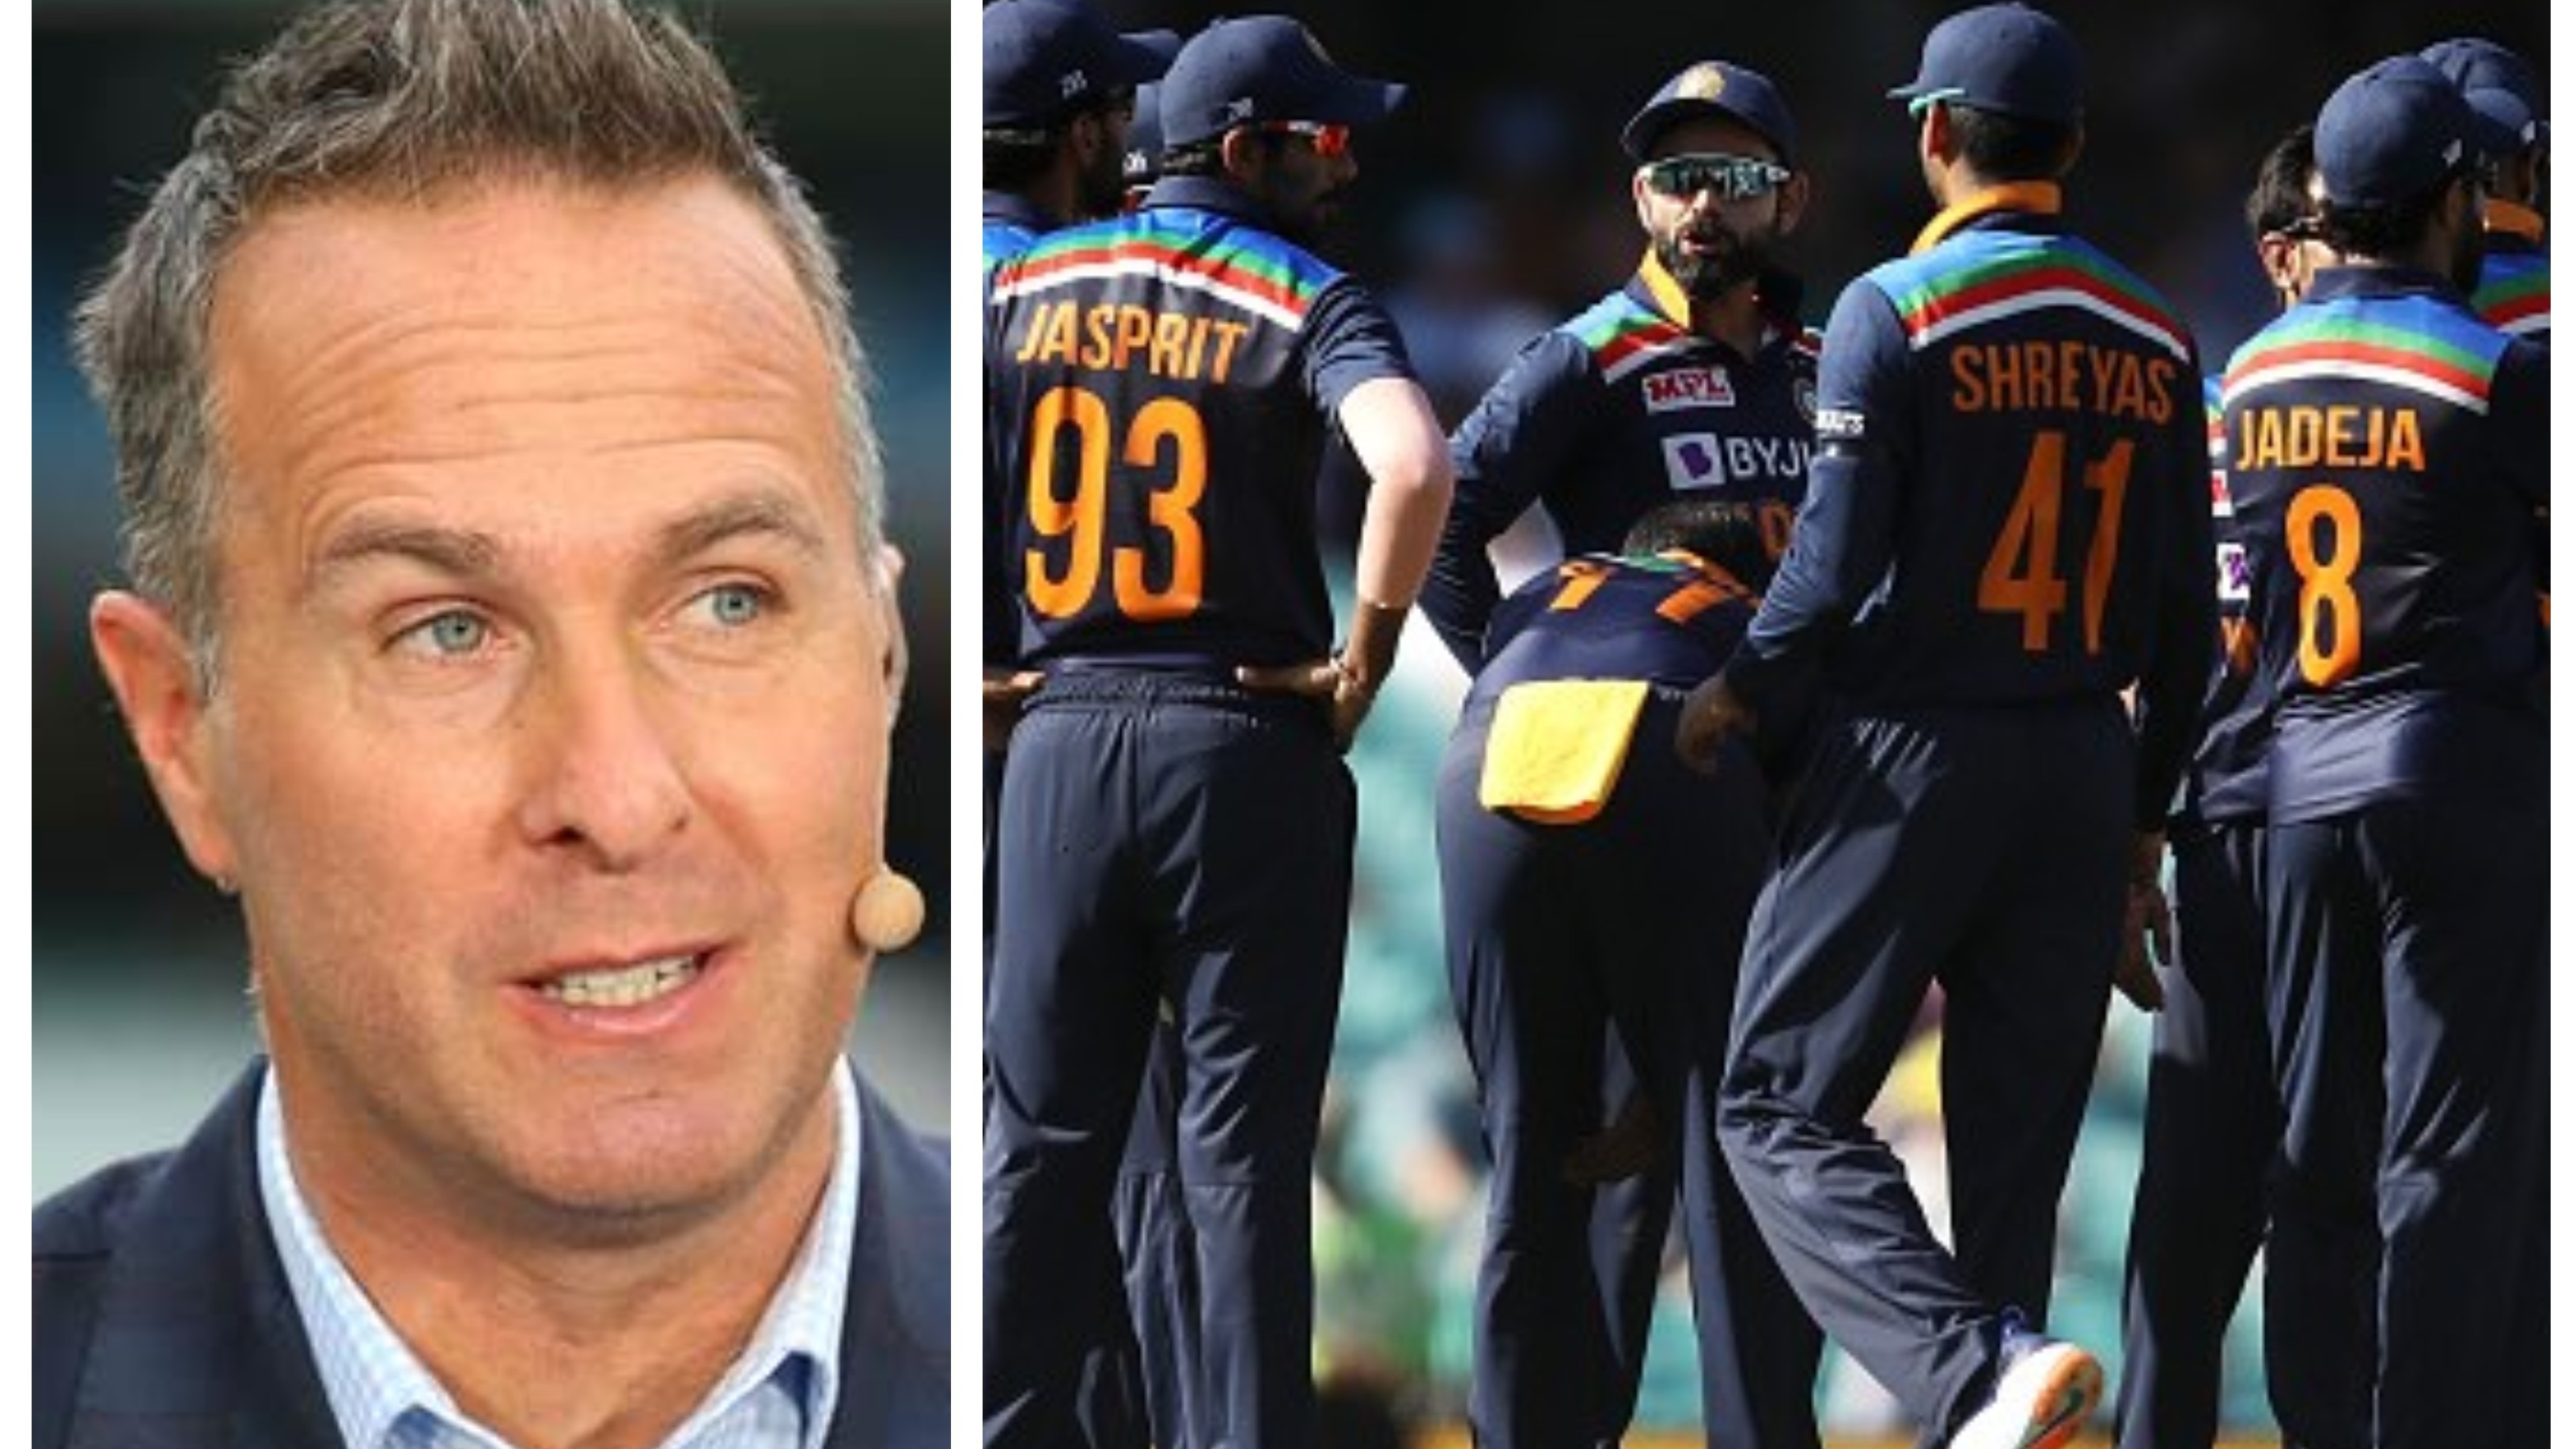 AUS v IND 2020-21: ‘It’s a little bit old school’, Michael Vaughan critical of Team India’s dressing room culture